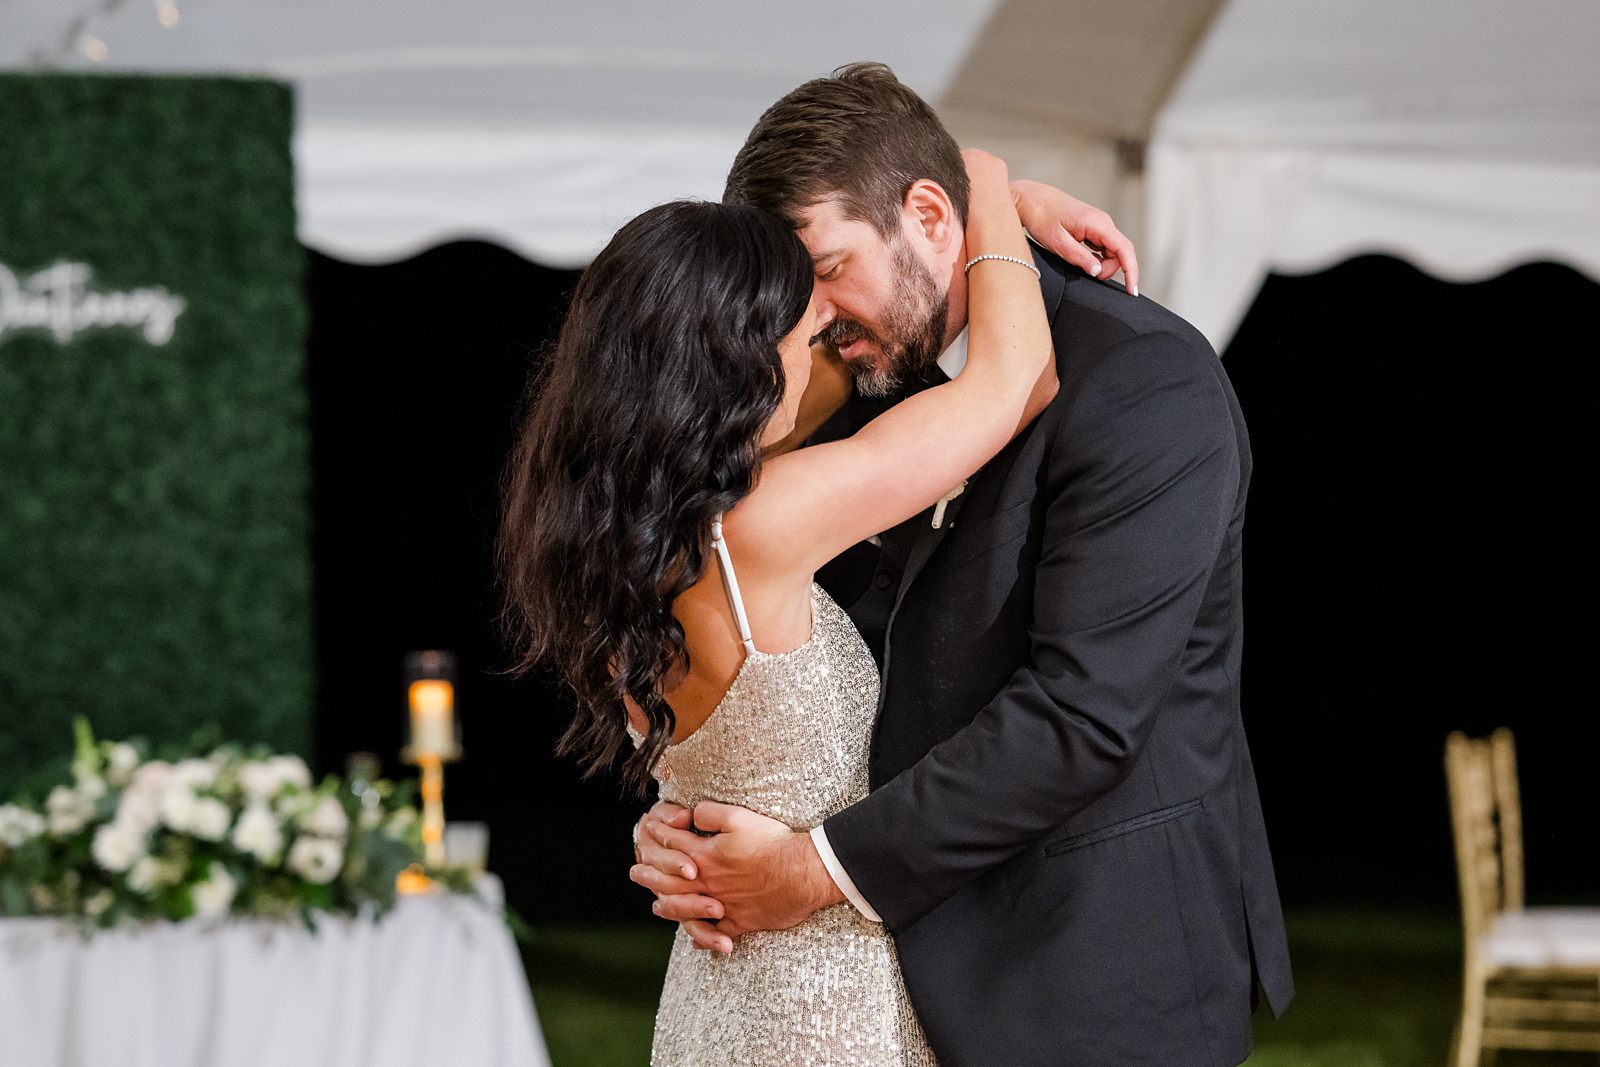 Bride and Groom Last Dance at Wedding Reception by Kailey Brianne Photography 